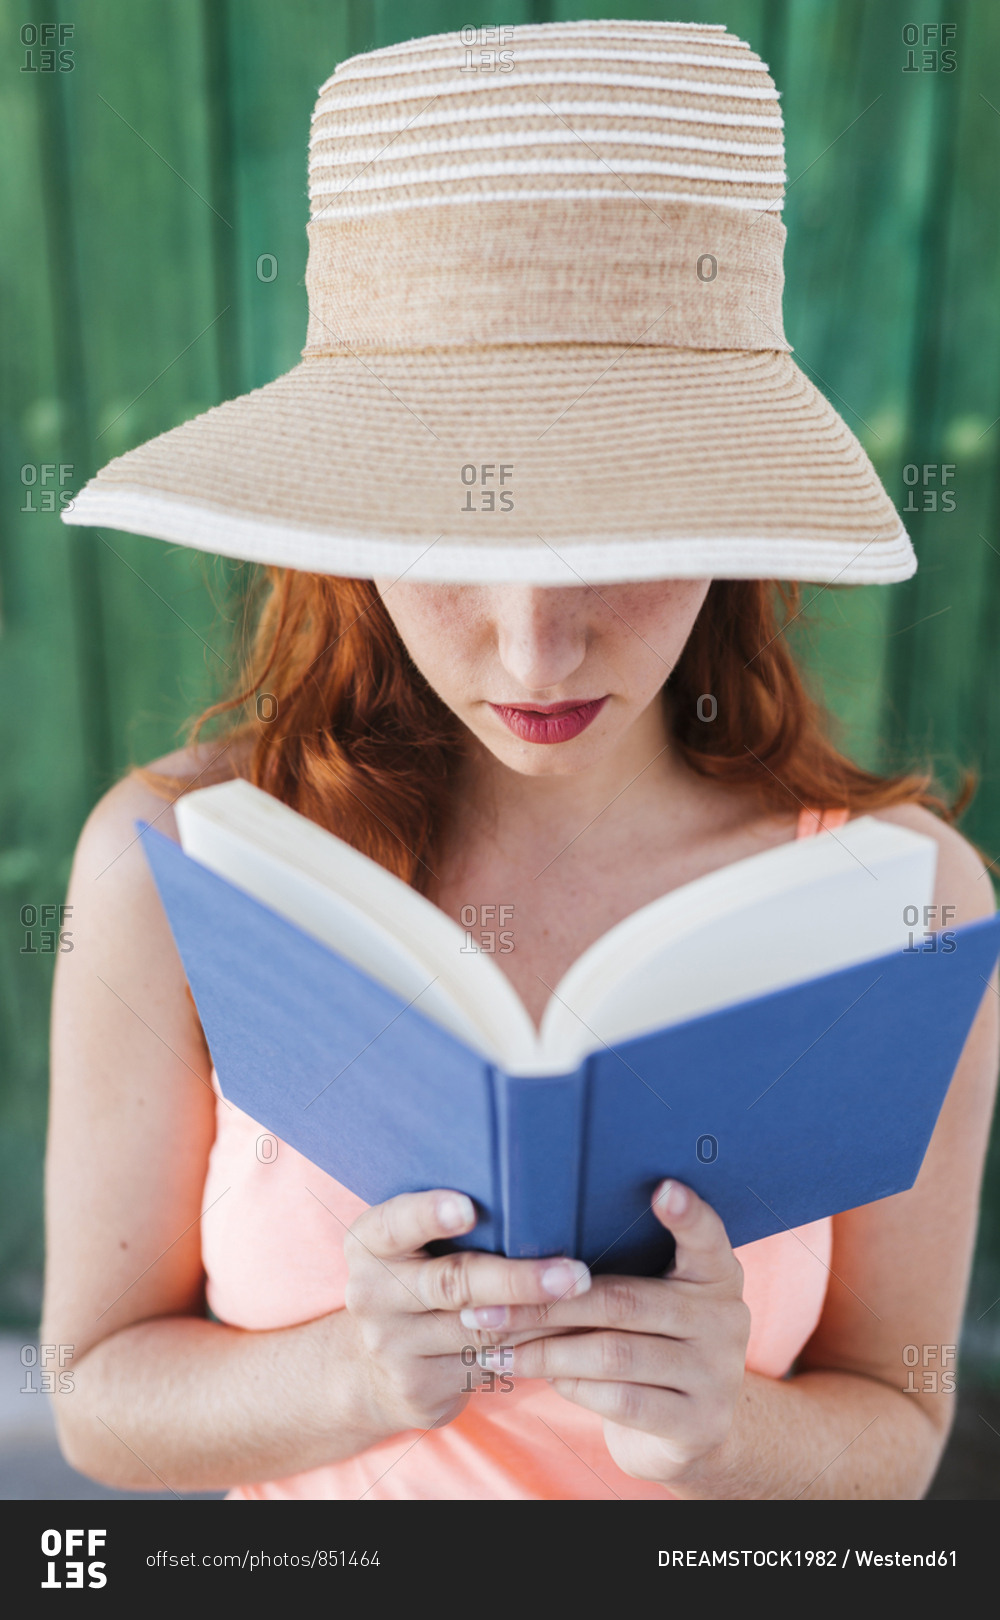 Redheaded young woman in front of green wooden door reading a book in summer